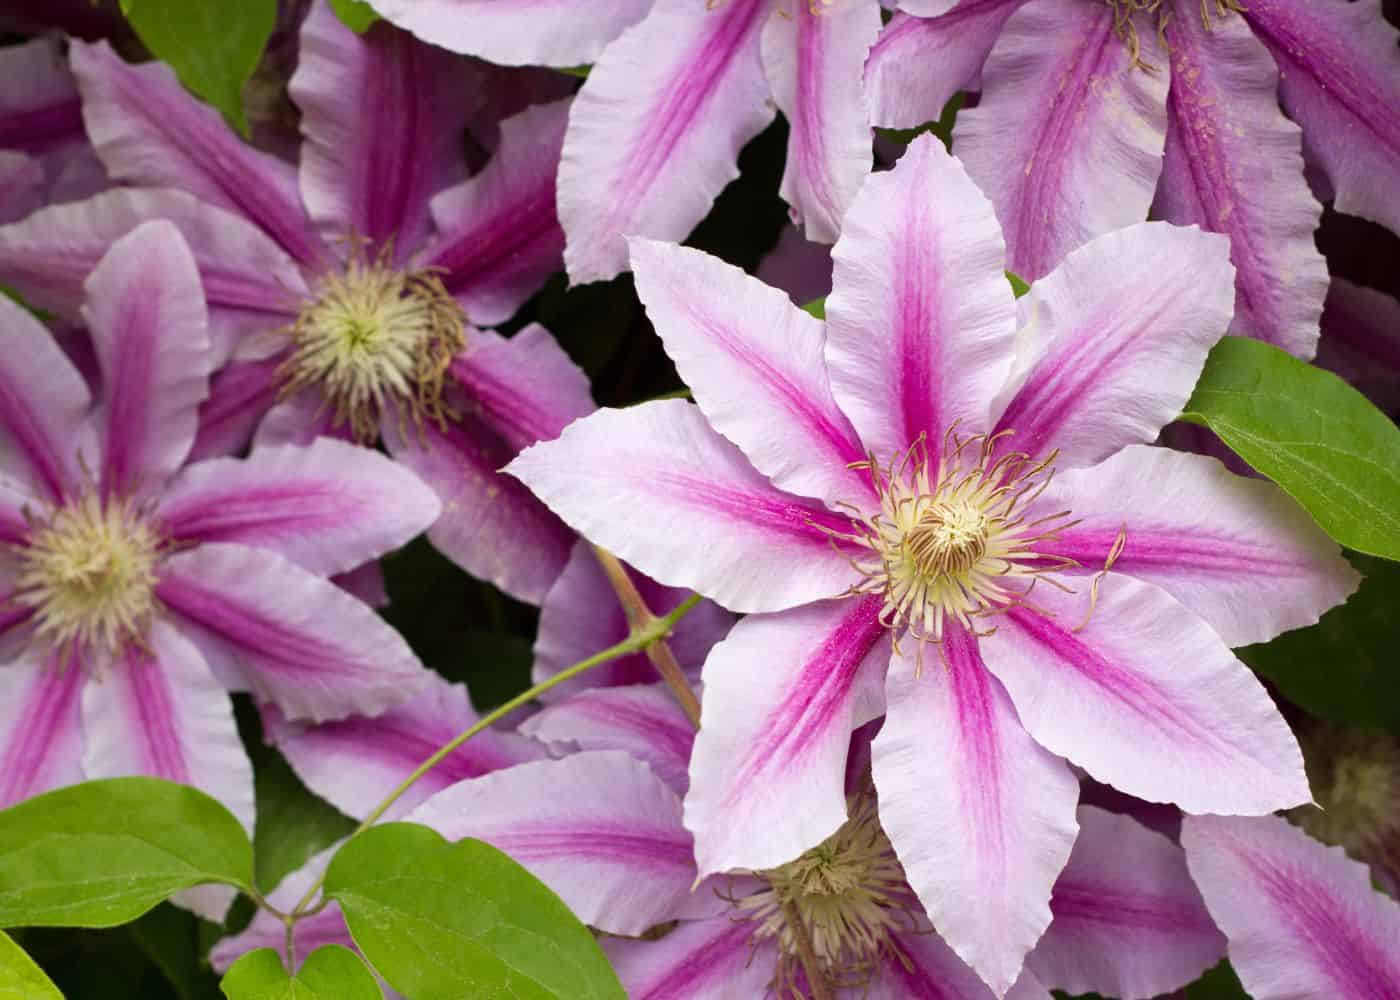 Pink clematis flowers